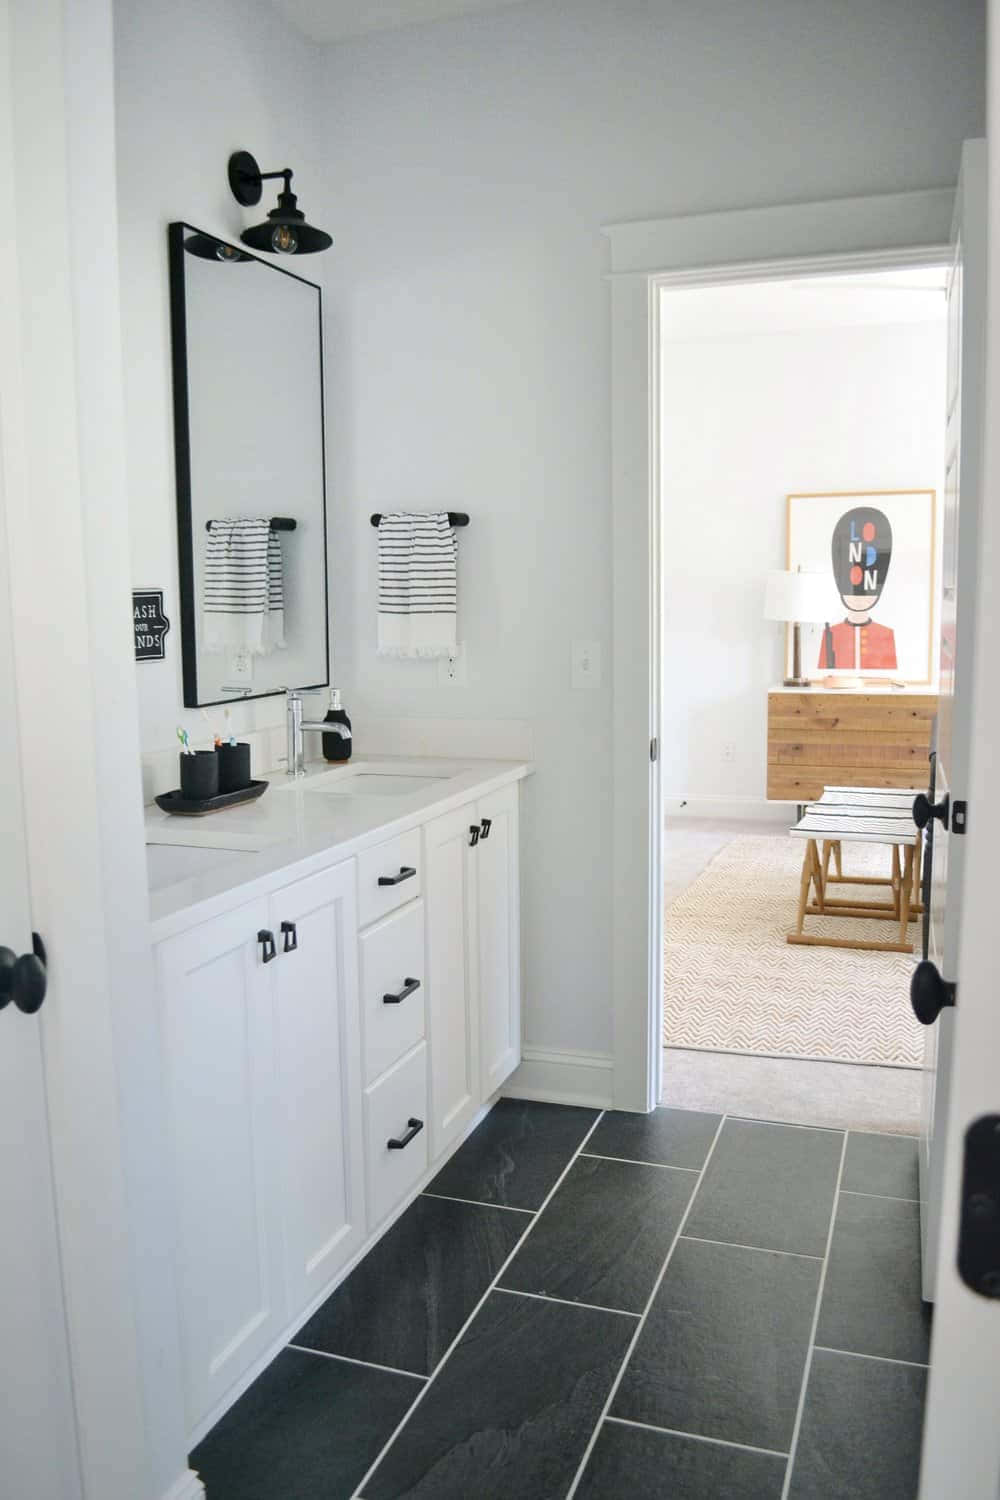 A Bathroom With White Tile And Black Tile